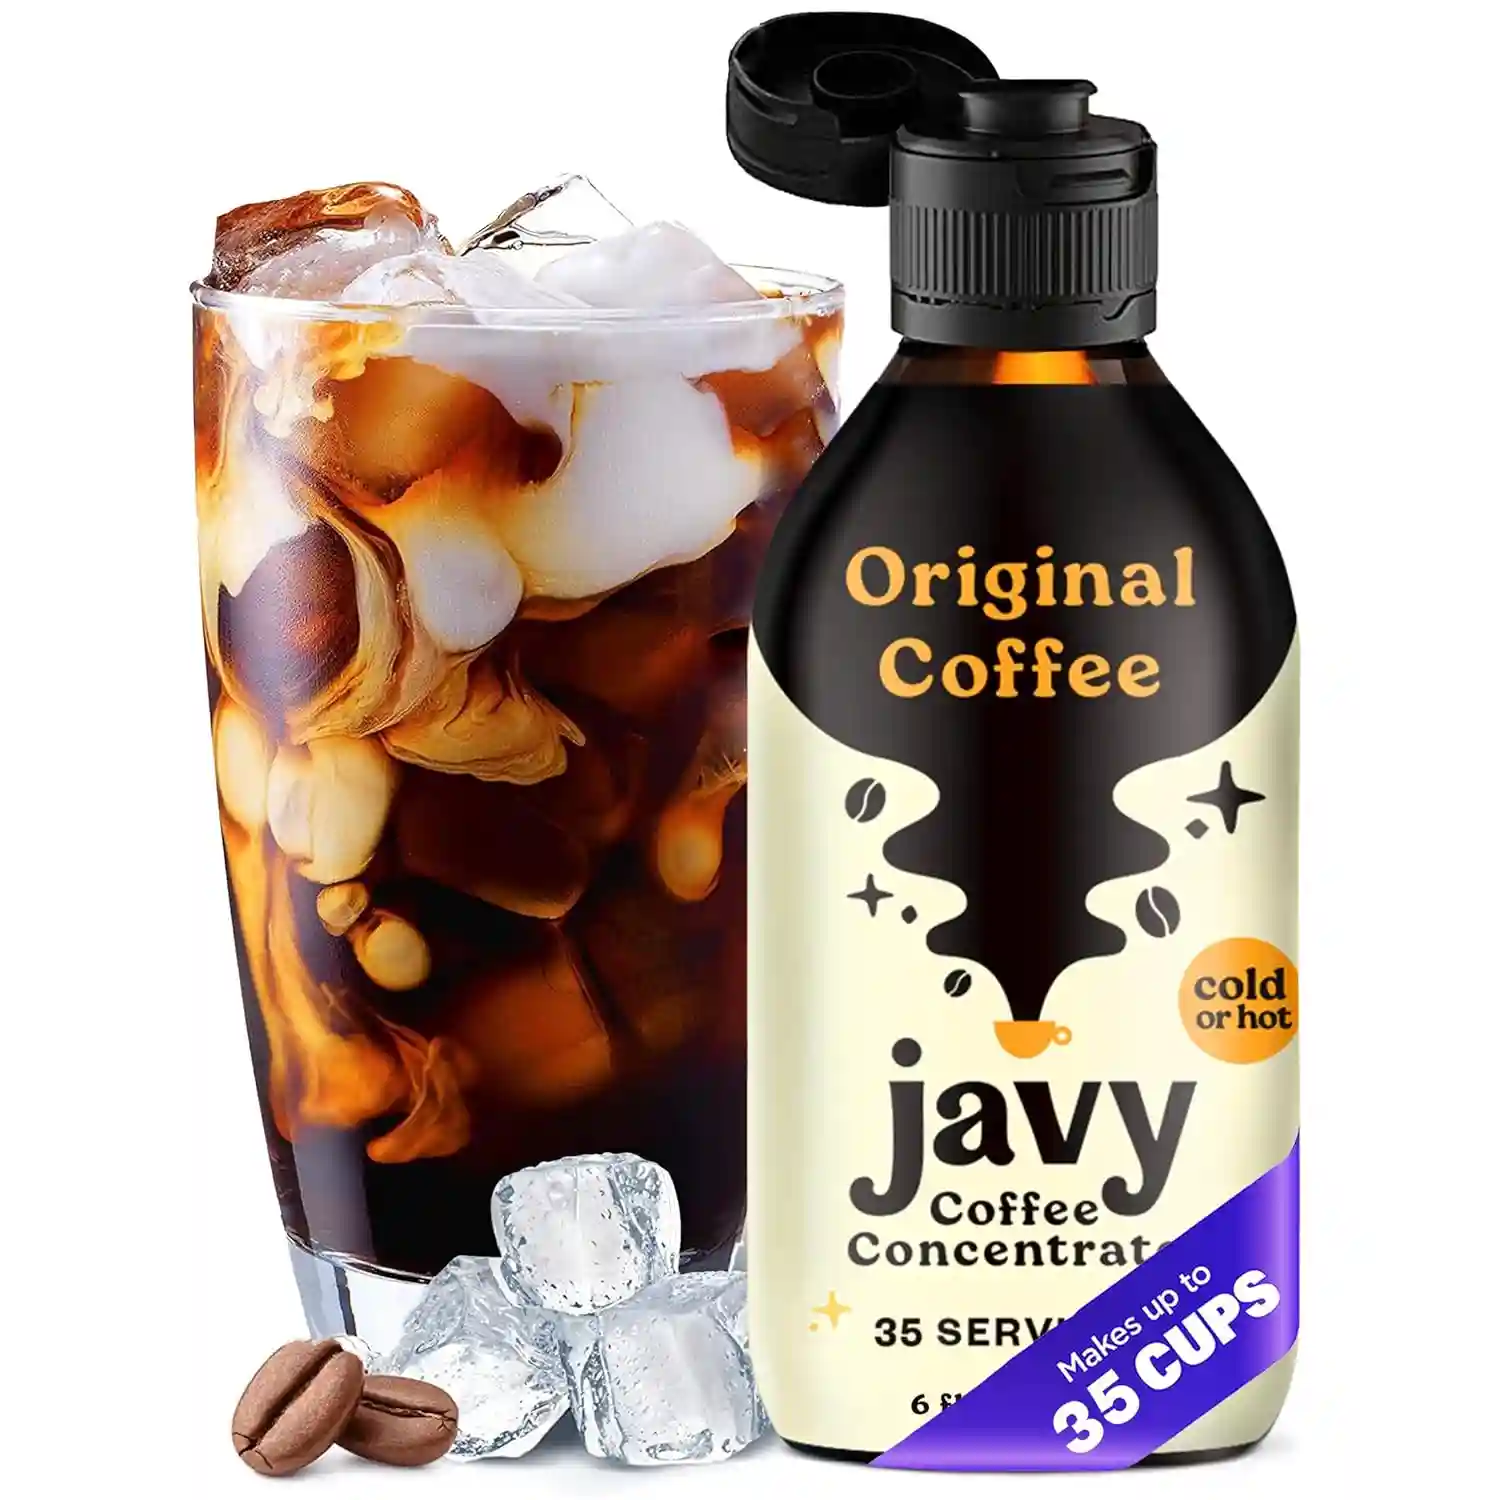 You are currently viewing Javy Coffee Review: Is Javy Coffee Legit or a Scam?